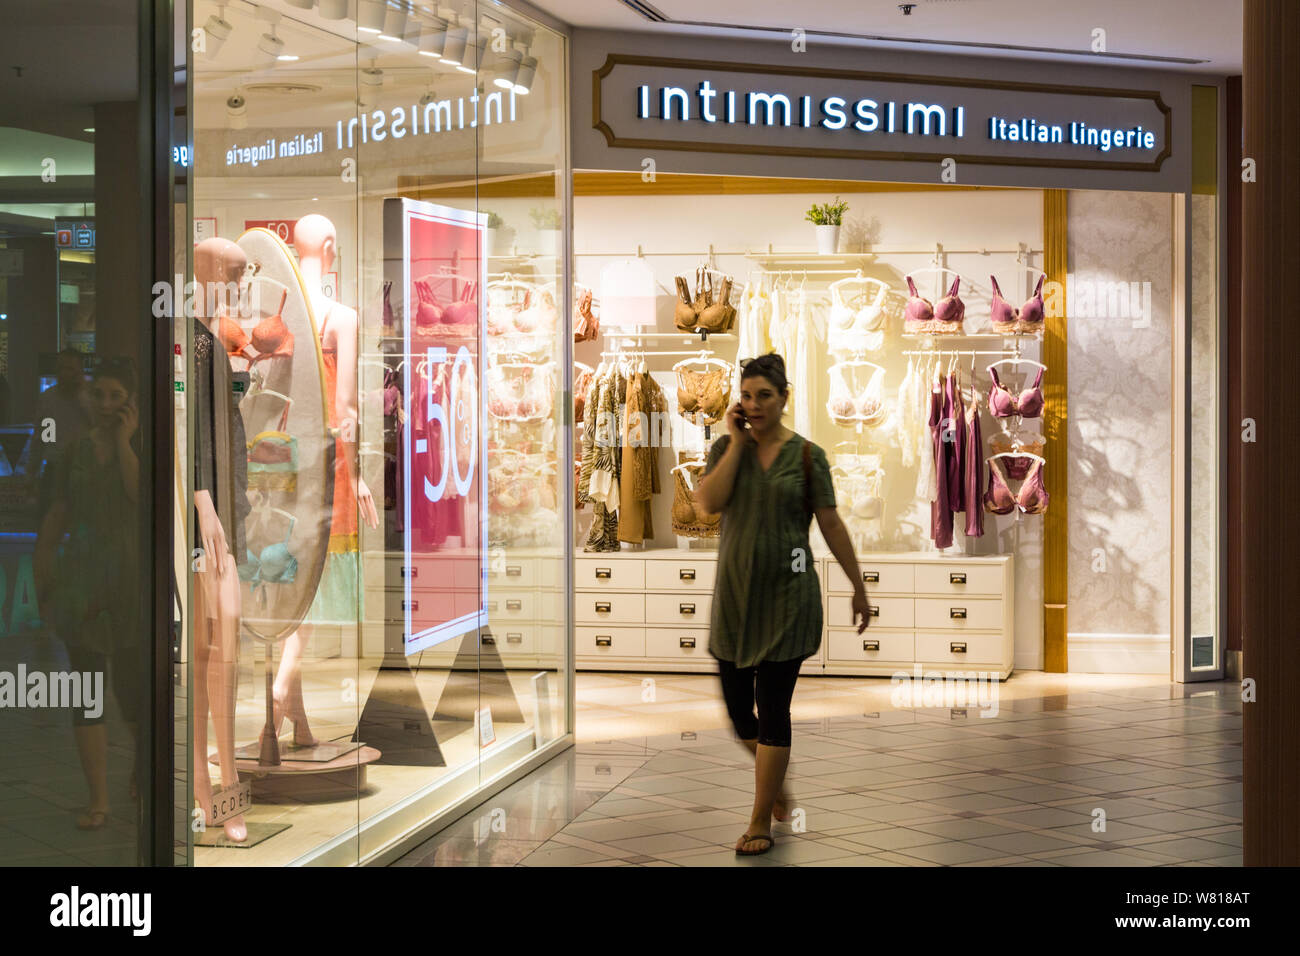 Intimissimi shop front in Mammut shopping center, Budapest ...